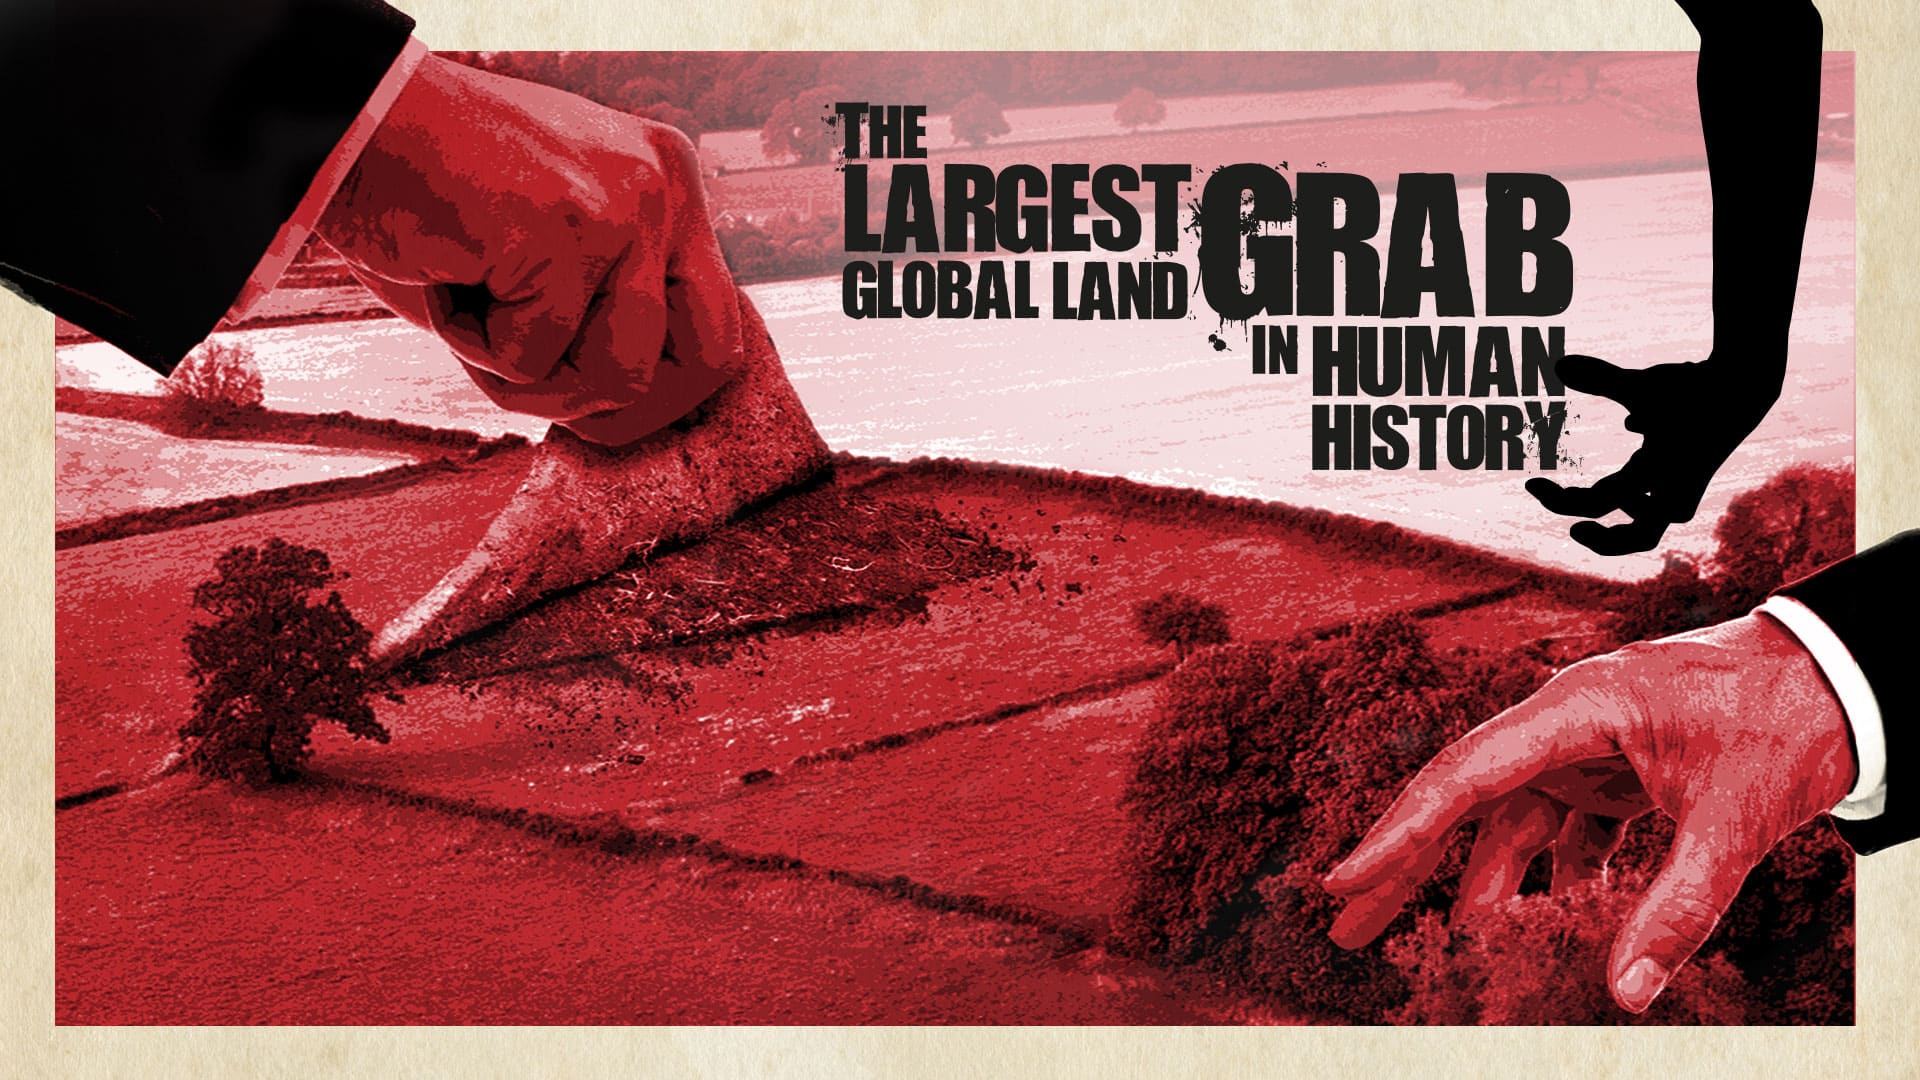 The Largest Global Land Grab In Human History